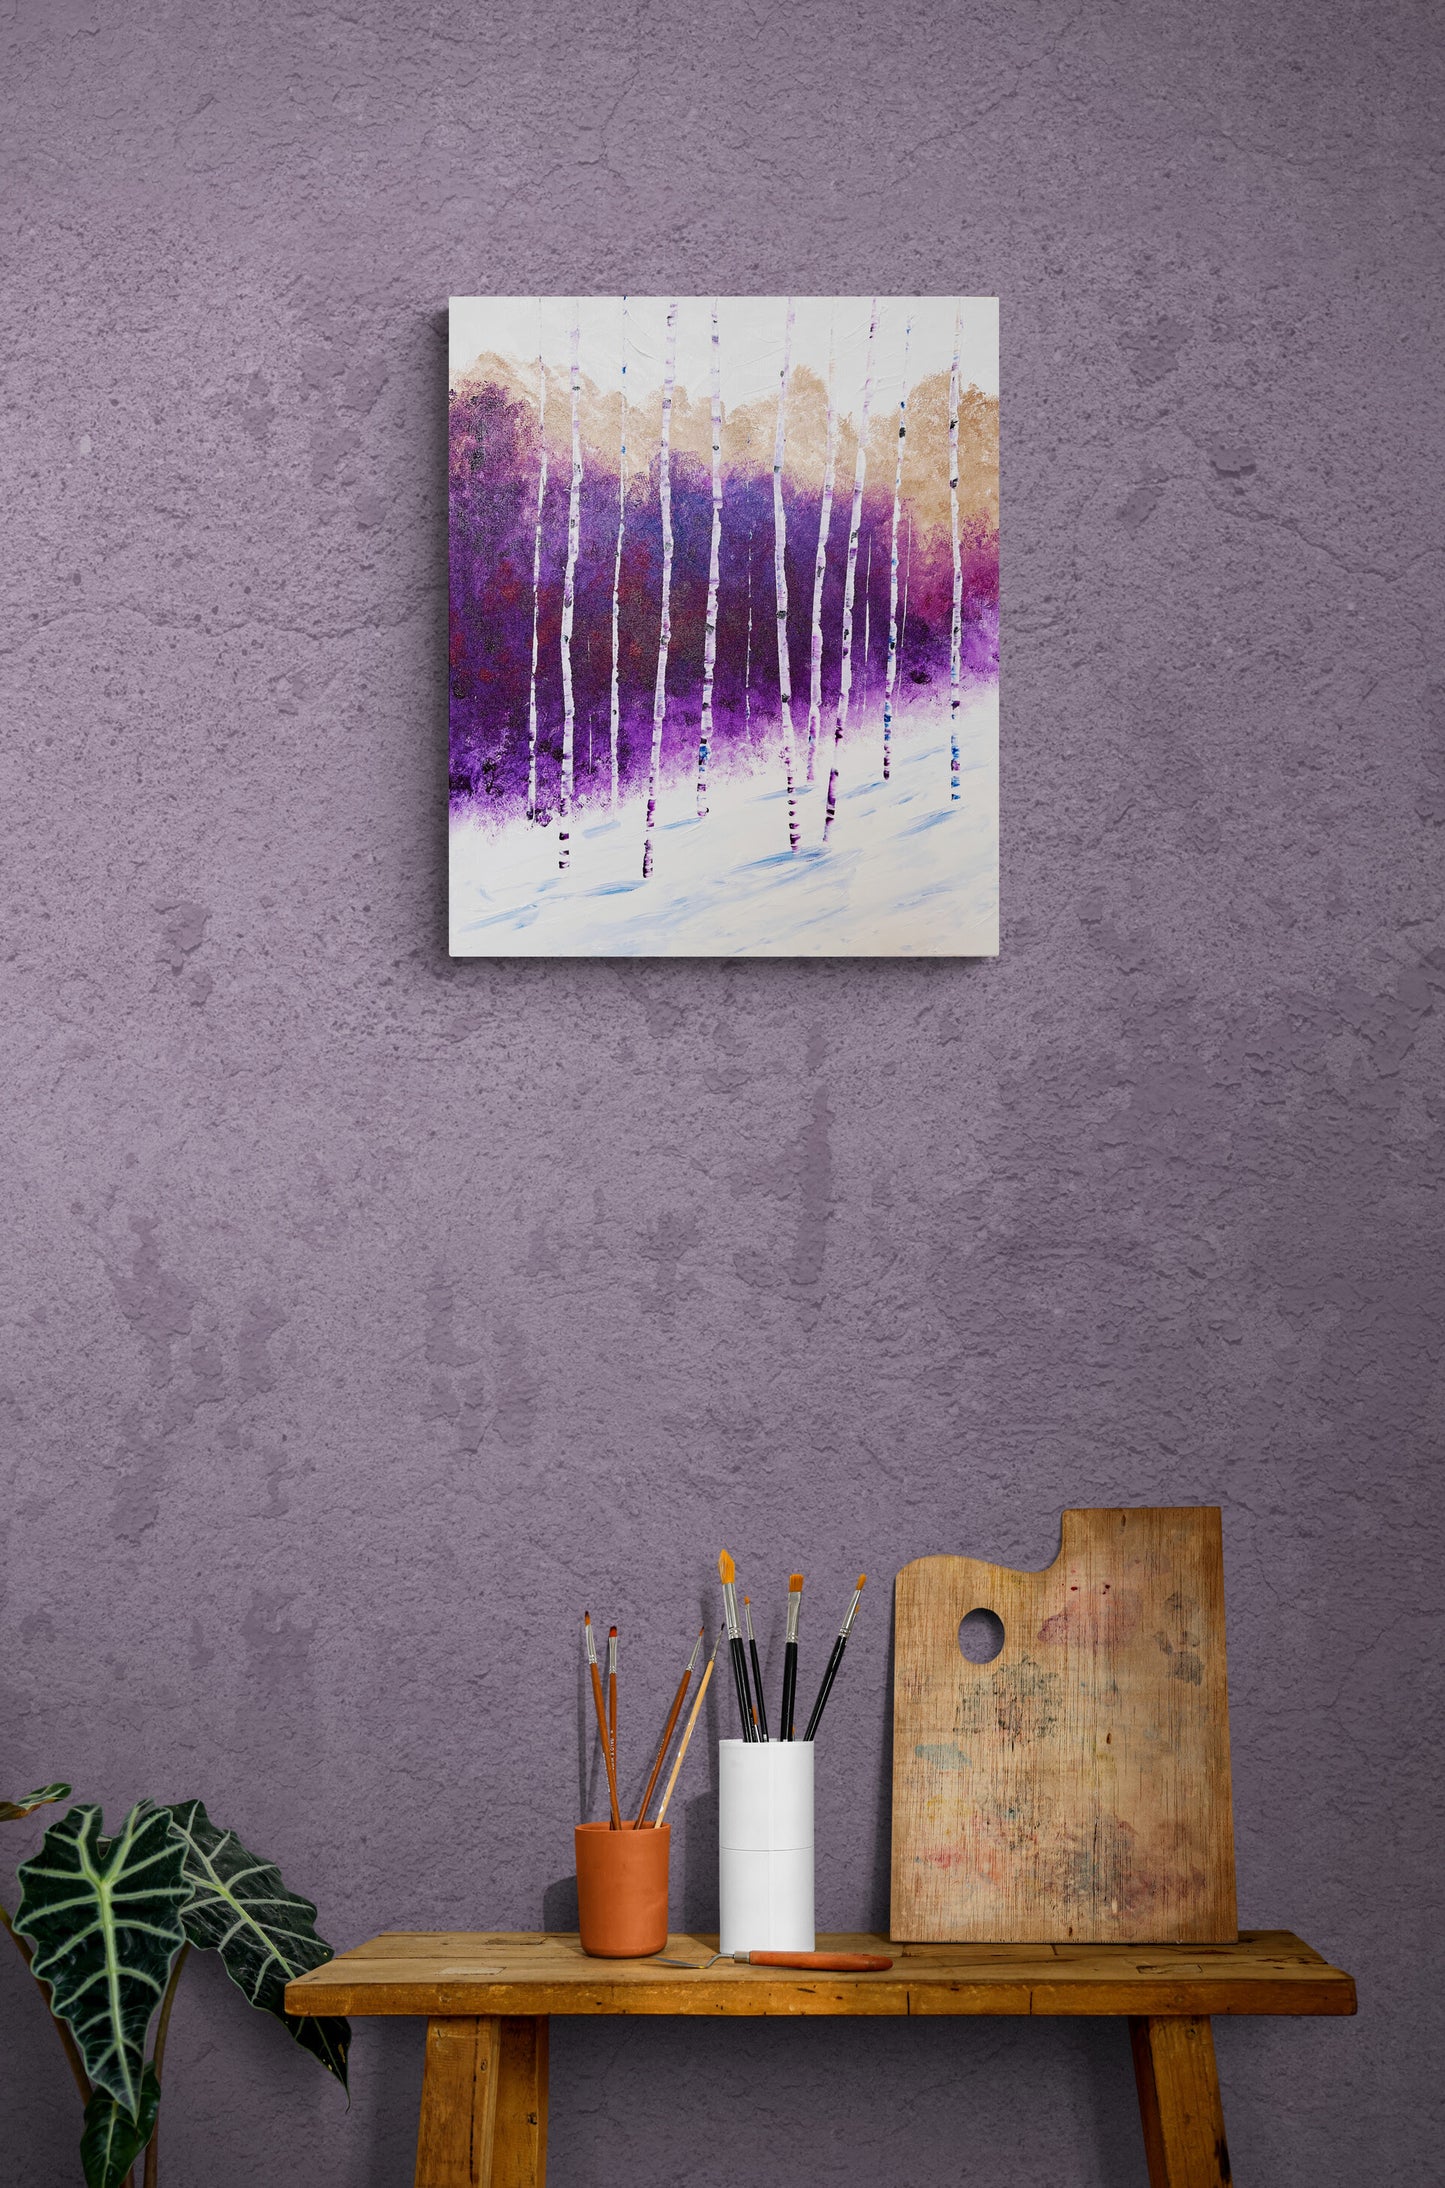 Violet Winterland- Abstract Colorado Winter Landscape with Aspen Trees